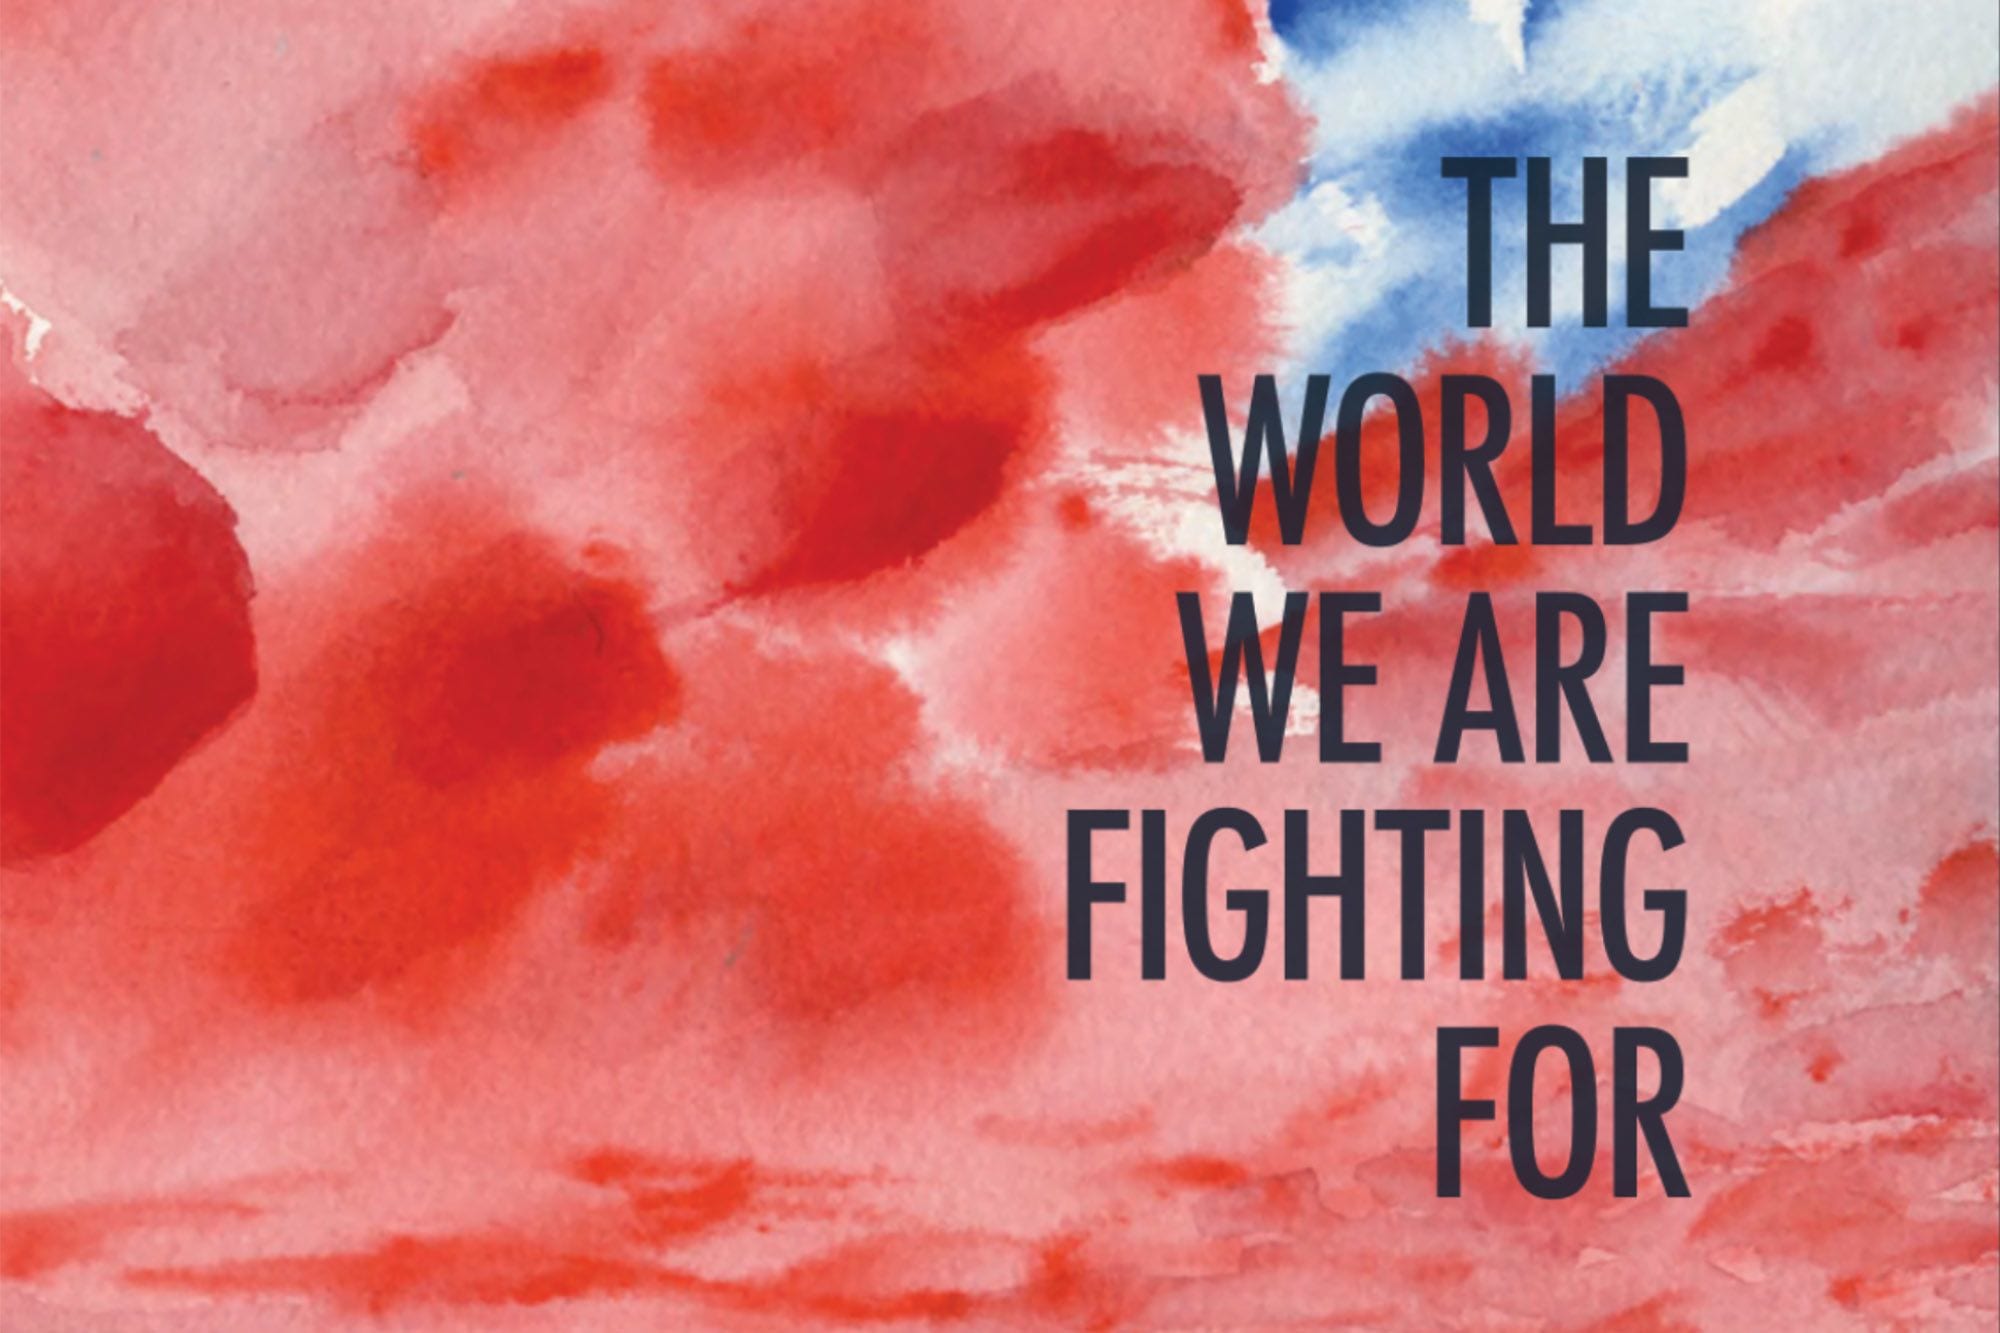 ‘World War 3 Illustrated #51: The World We Are Fighting For’